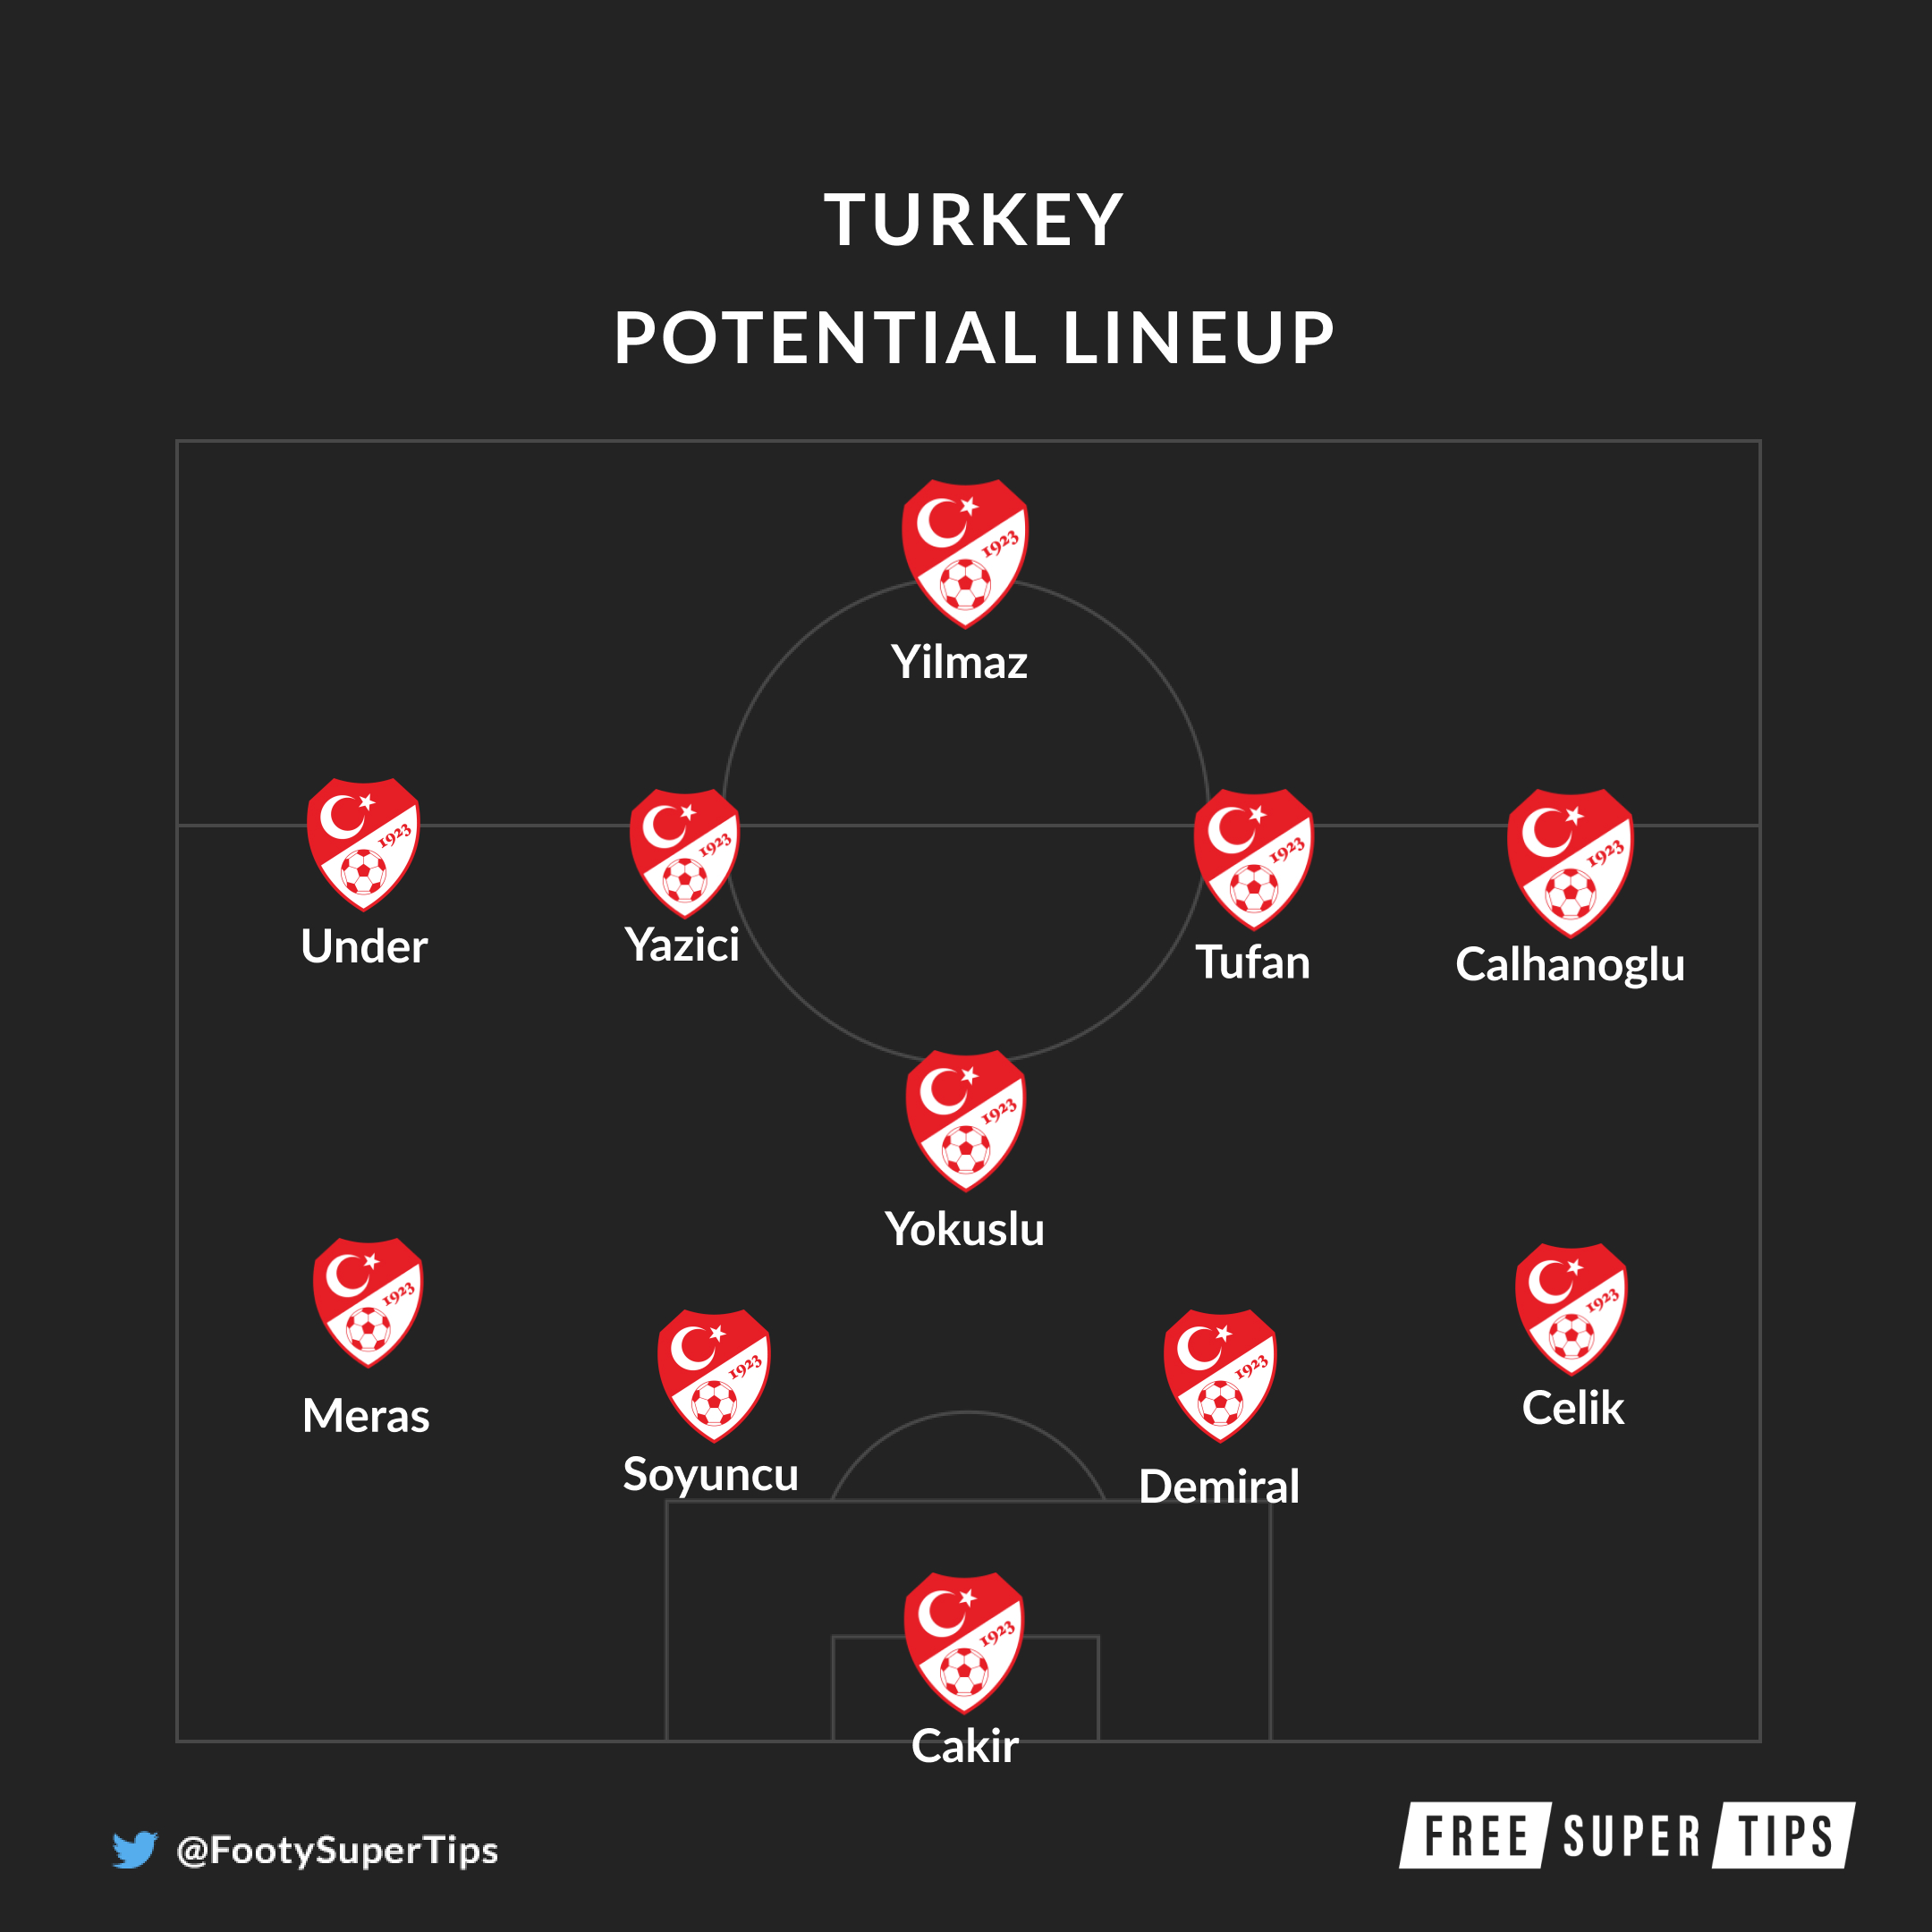 Turkey potential lineup